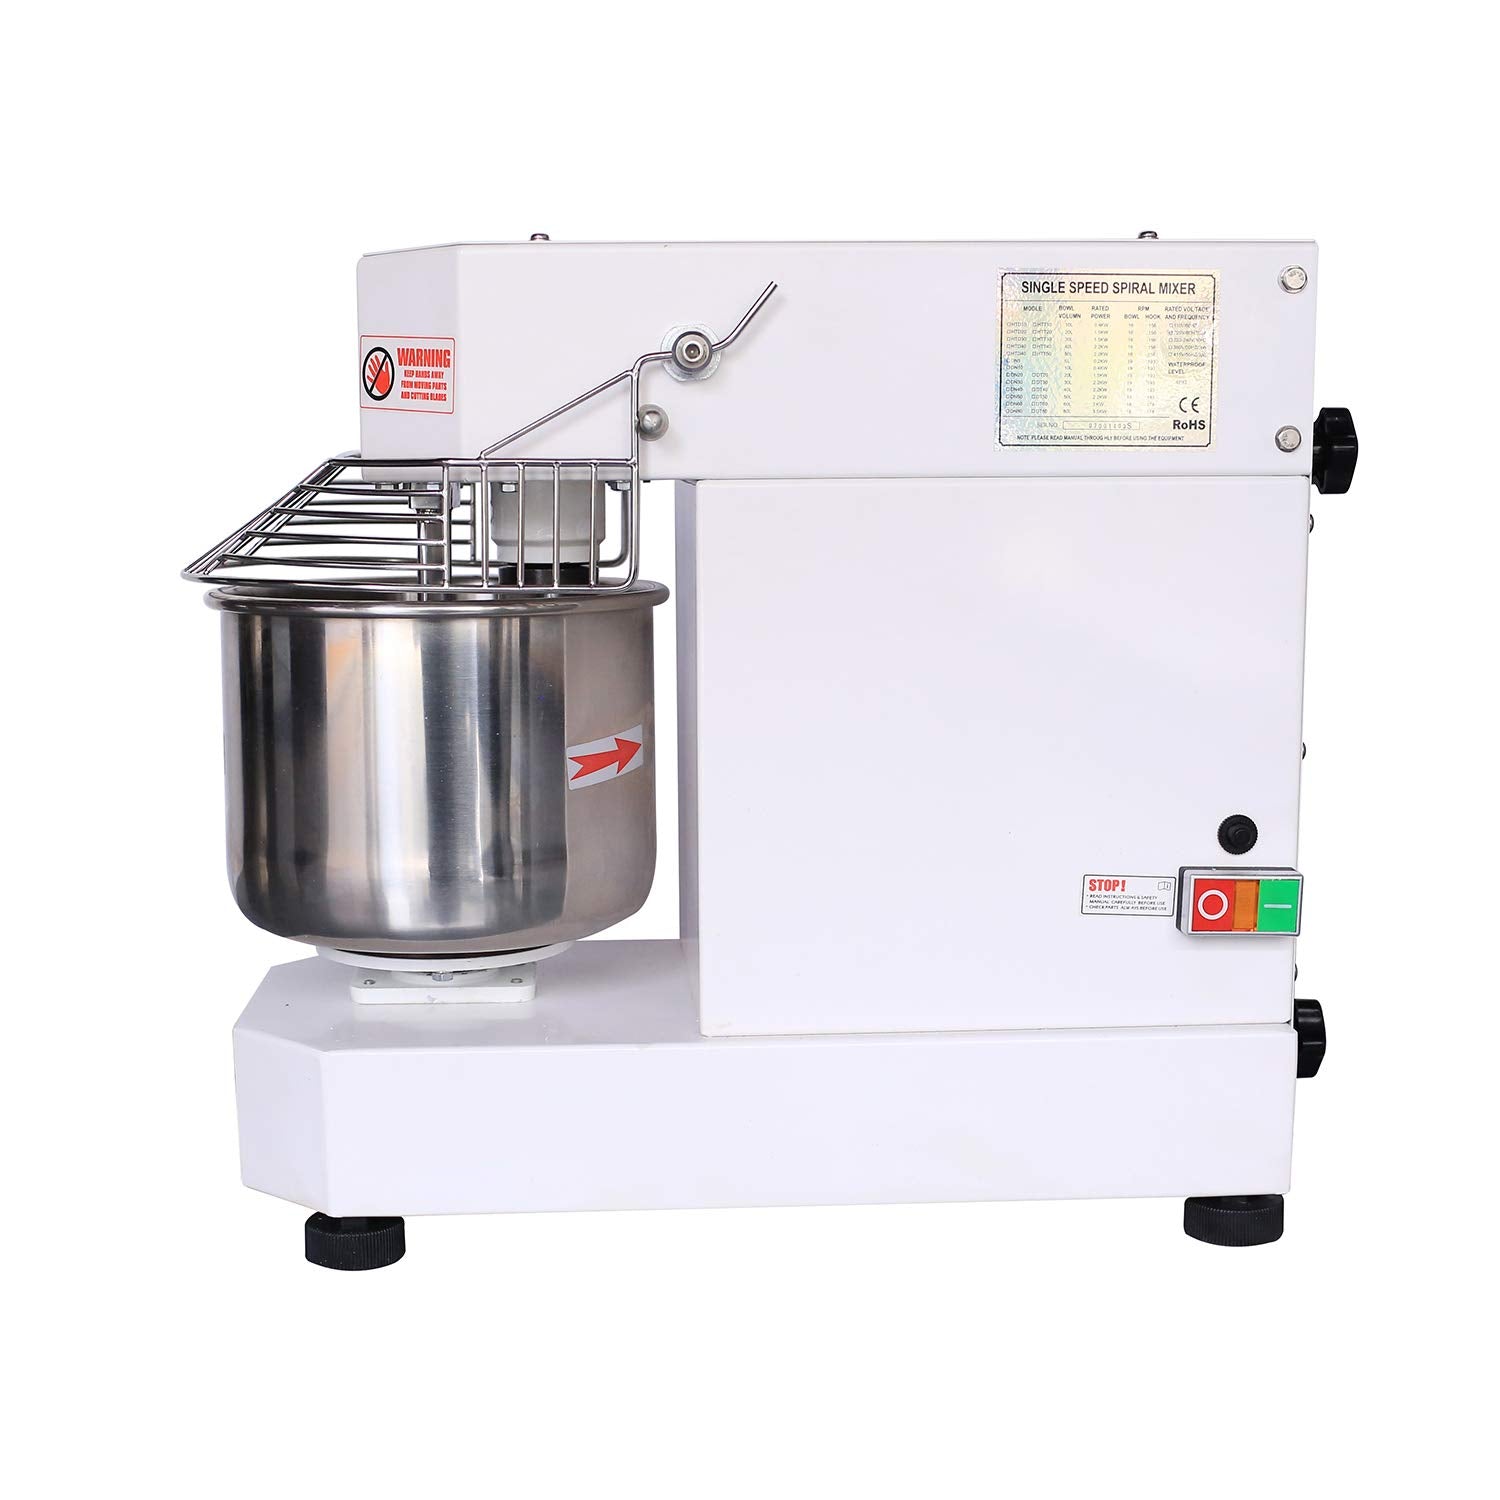 Bread Kneading Machine Commercial Stand Dough Mixers 20L